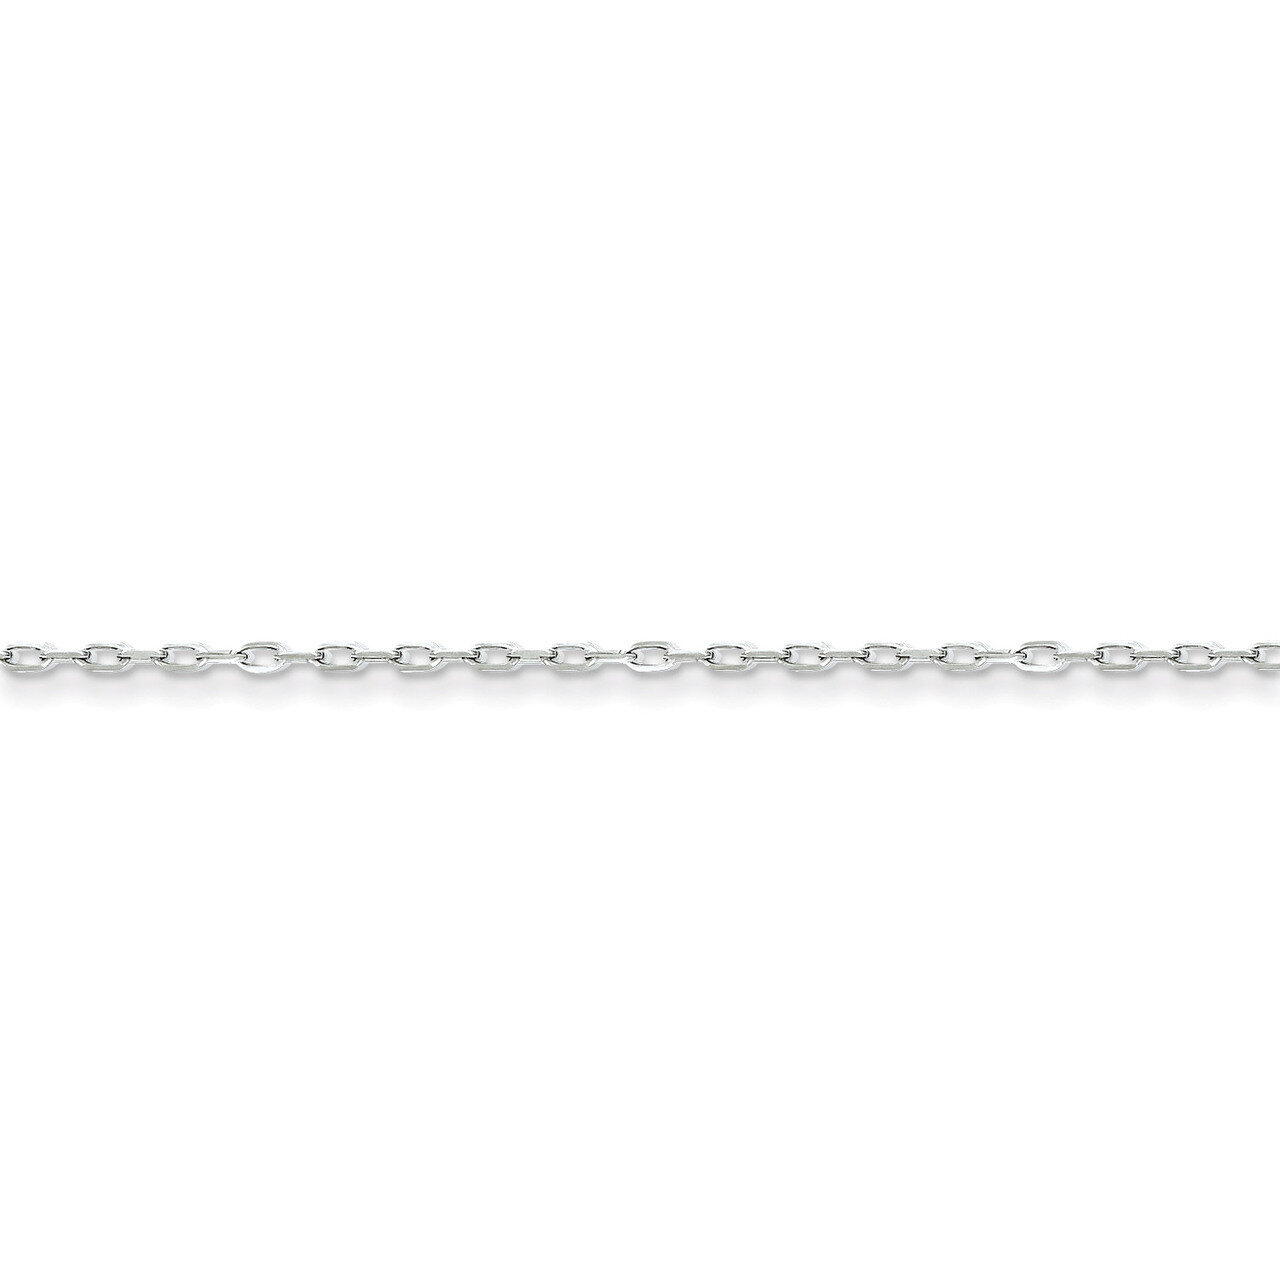 24 Inch 1.65mm 8 Sided Diamond Cut Cable Chain Sterling Silver QPE69-24